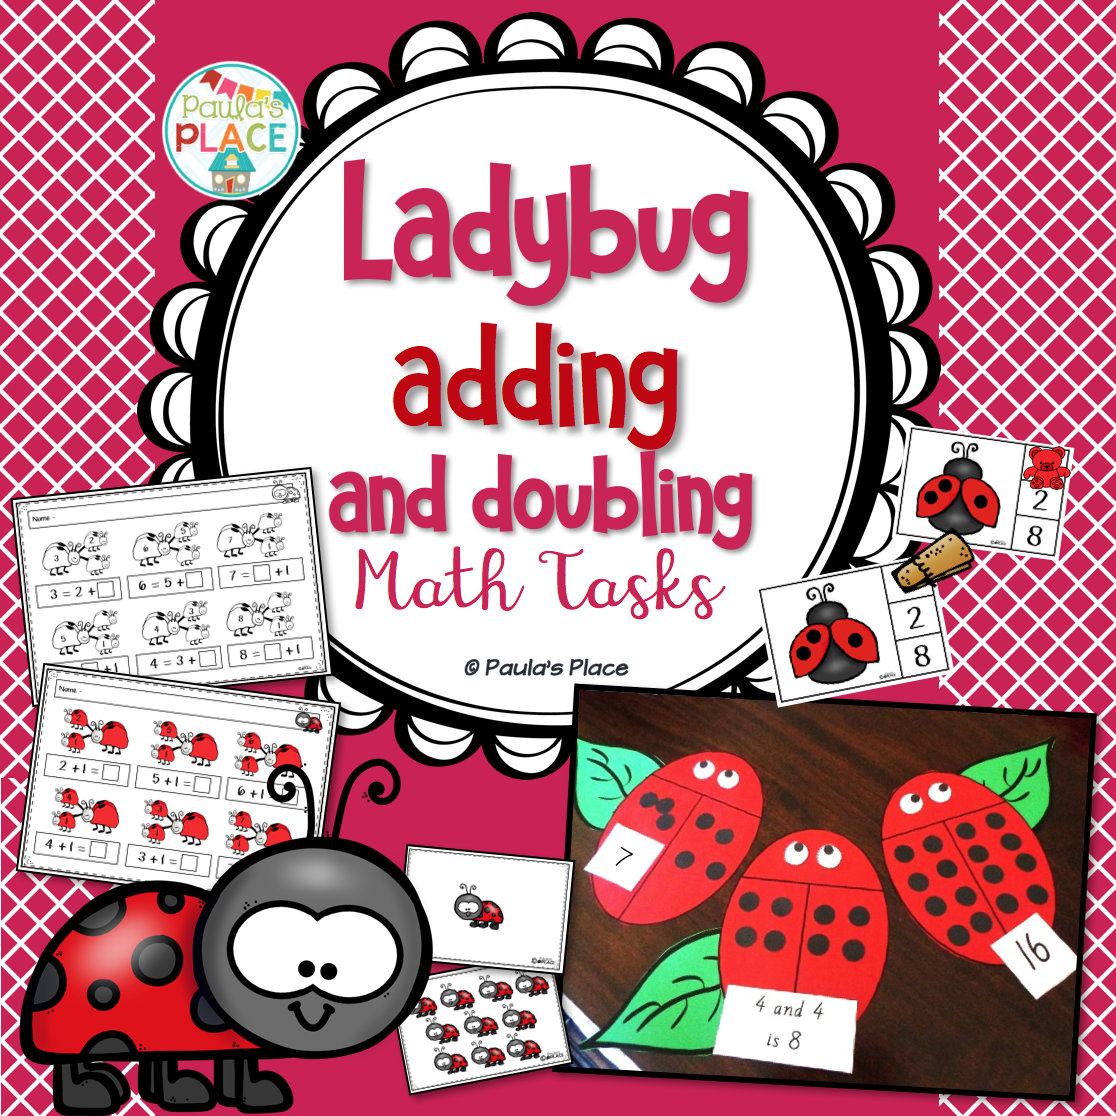 Paula's Place Teaching Resources: Ladybug Maths - Doubles and Adding Fun